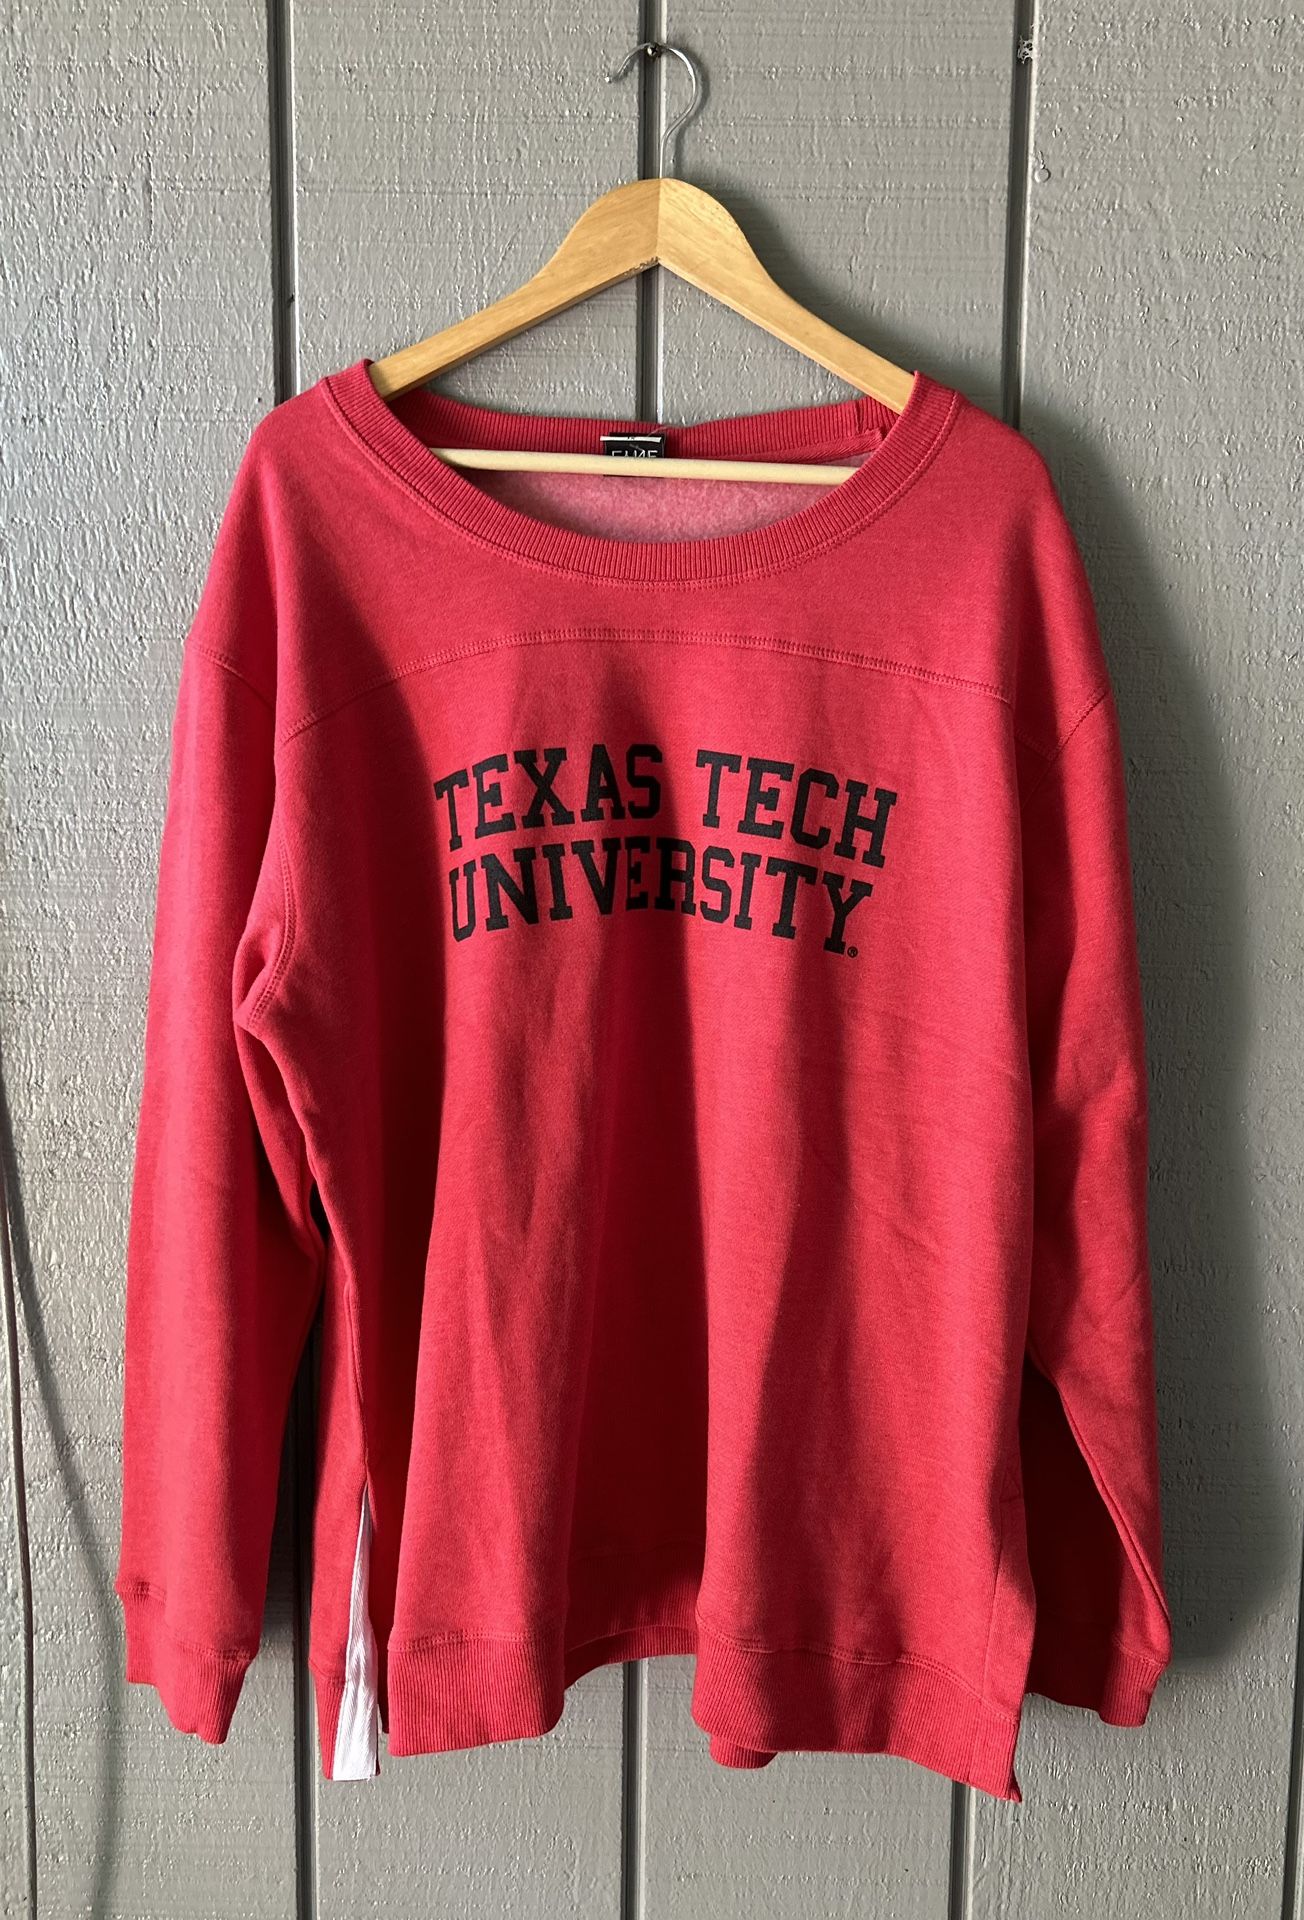 Texas Tech Sweatshirt Adult Red  XLG Red  Raiders Casual Pullover Sweater NWT